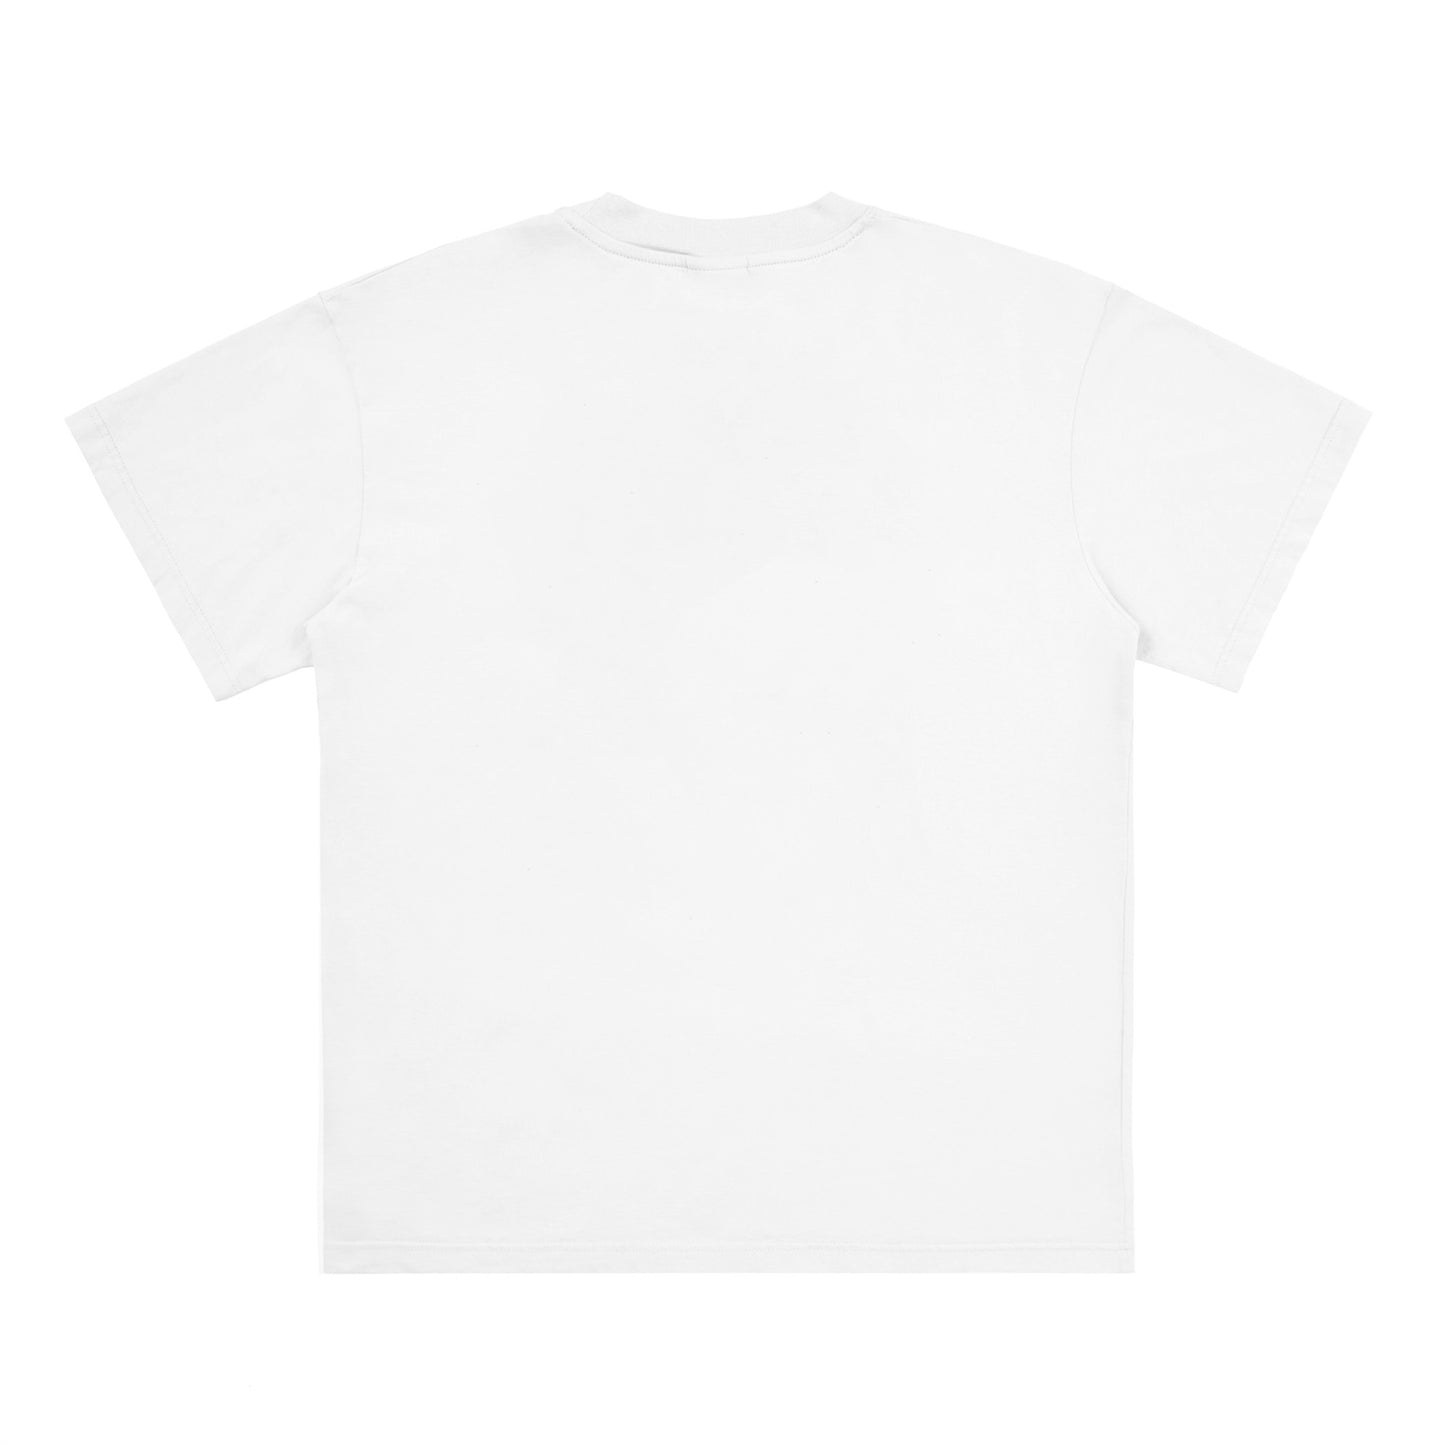 COLLEGE HERITAGE – T-SHIRT (WH)